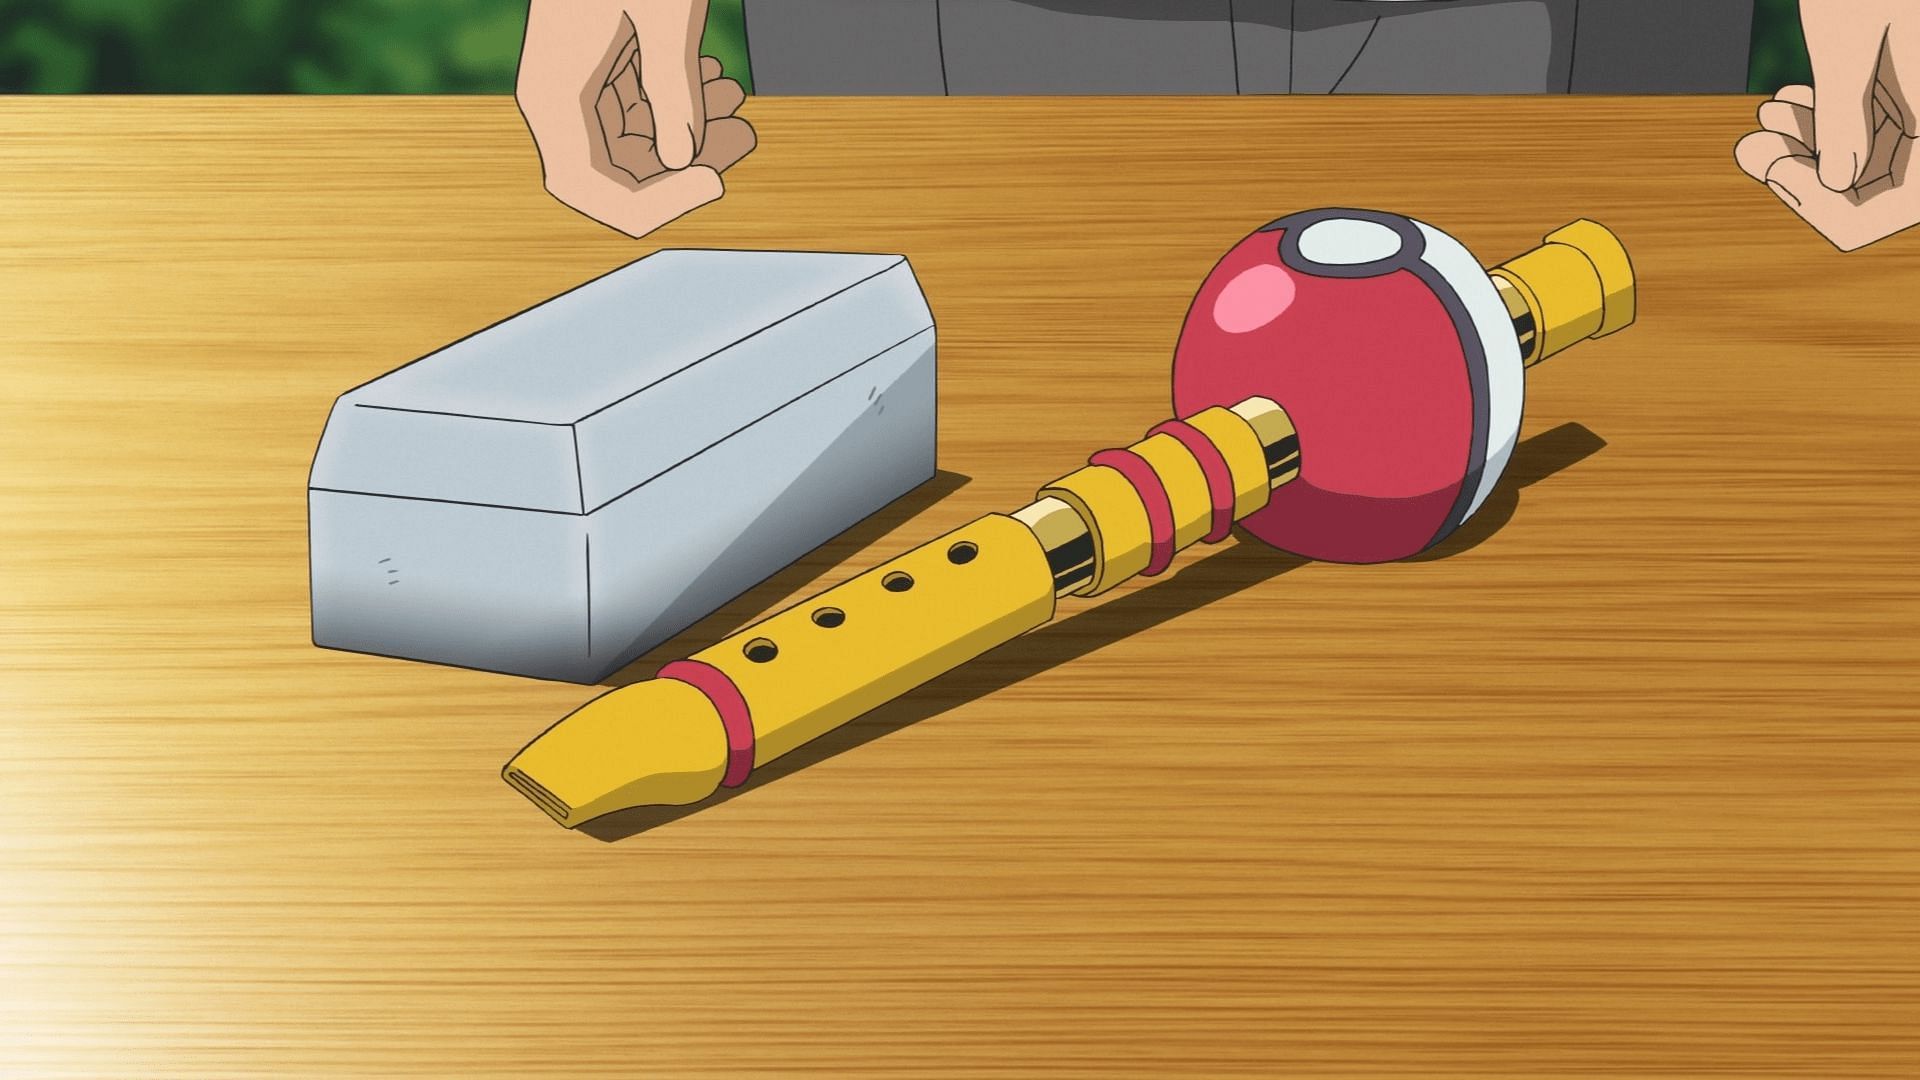 The Poke Flute as seen in the anime